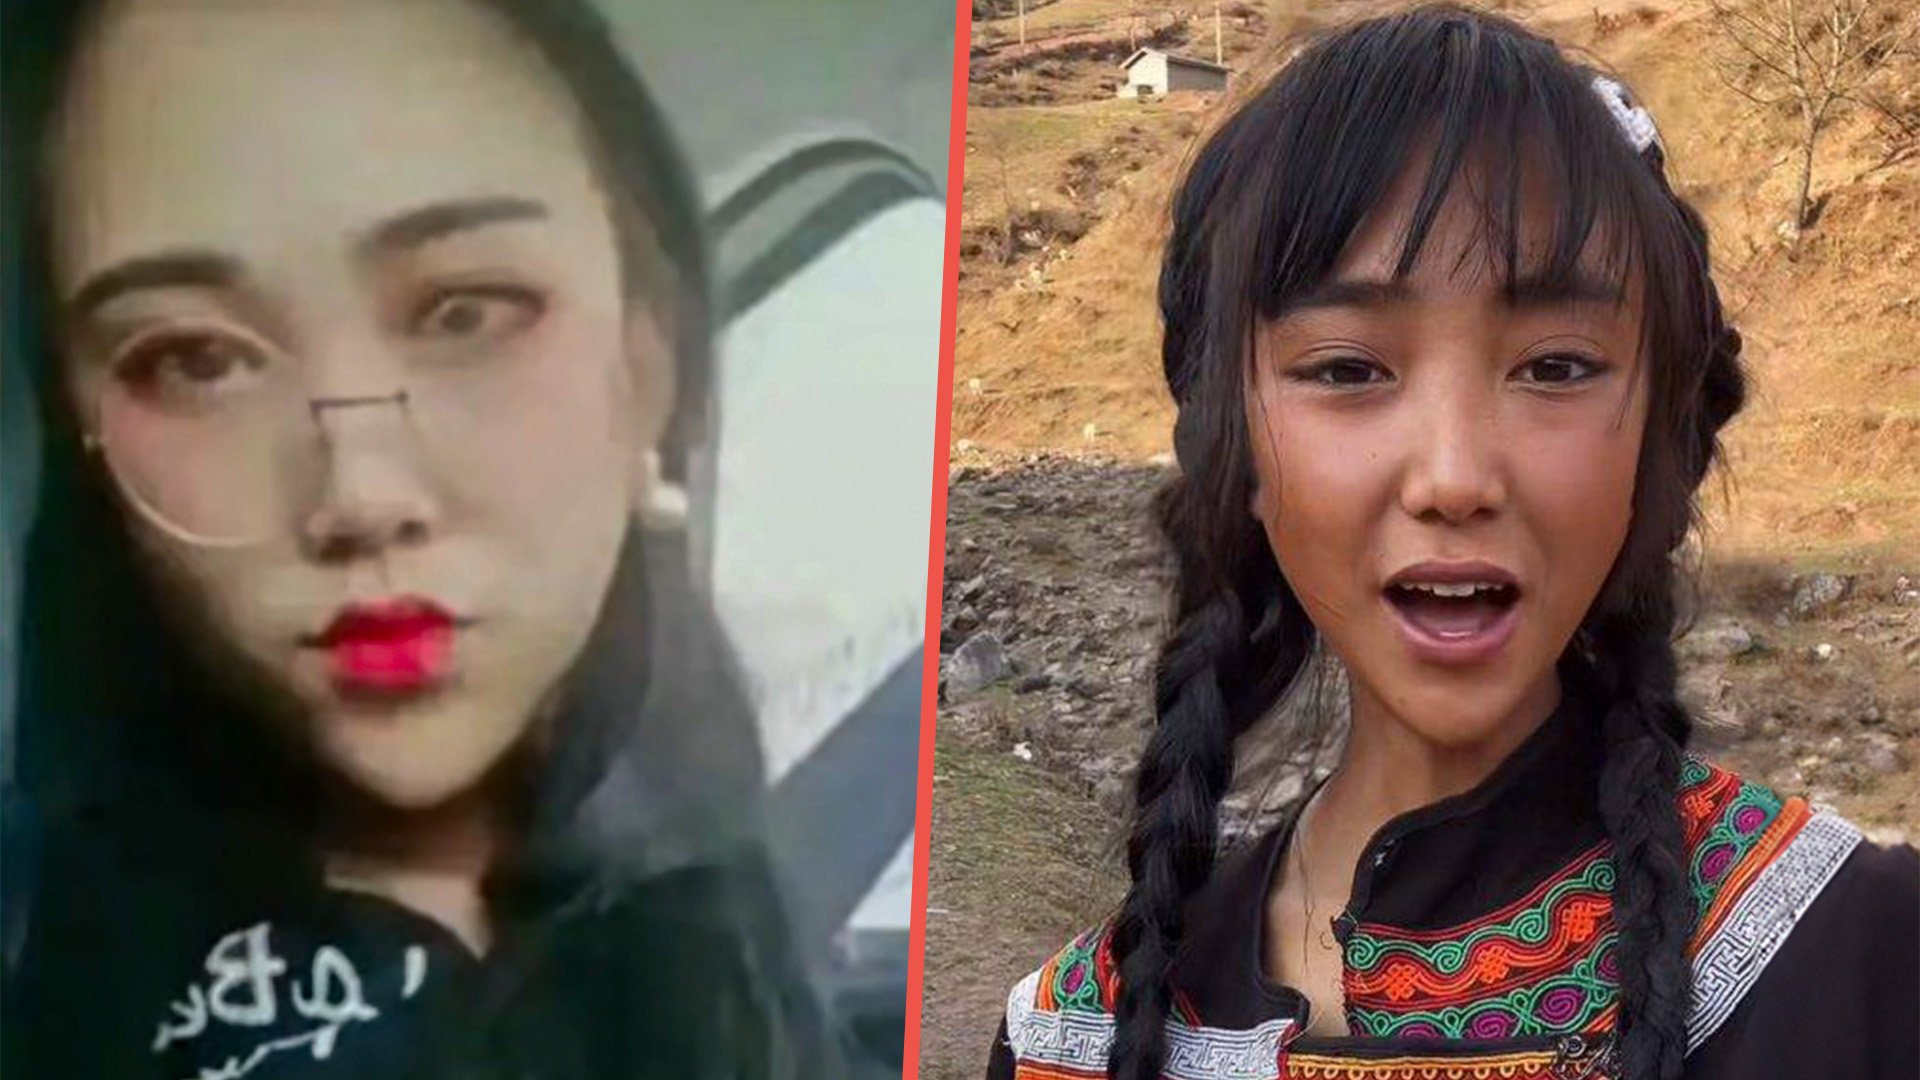 Police in China have broken up a fake influencers racket which saw pretend ethnic minority online personalities use bogus sob stories to scam viewers into buying fake organic products. Photo: SCMP composite/Douyin